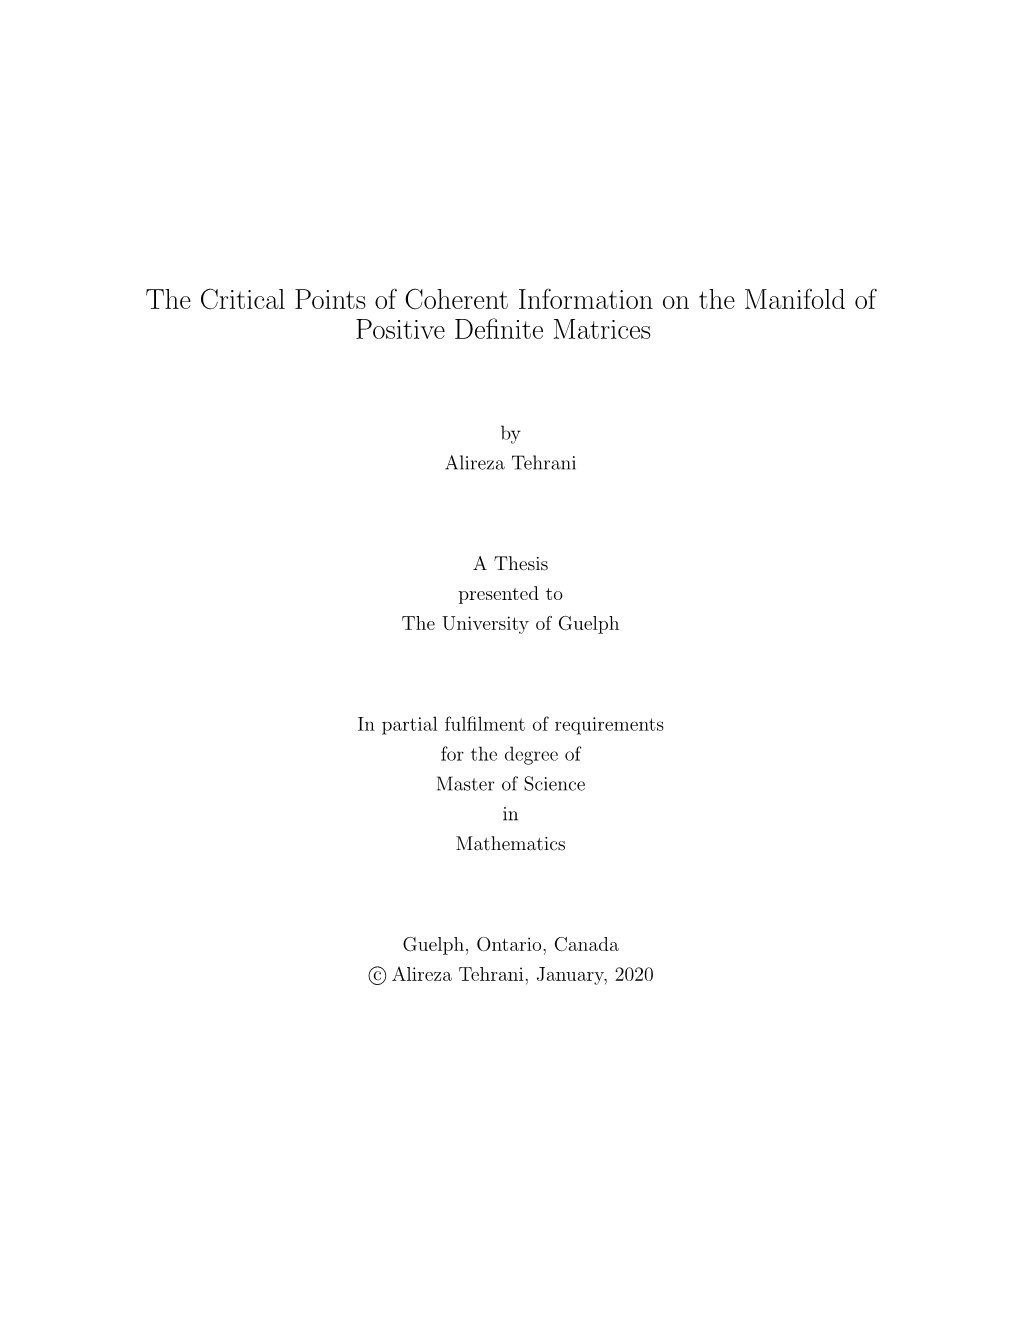 The Critical Points of Coherent Information on the Manifold of Positive Deﬁnite Matrices